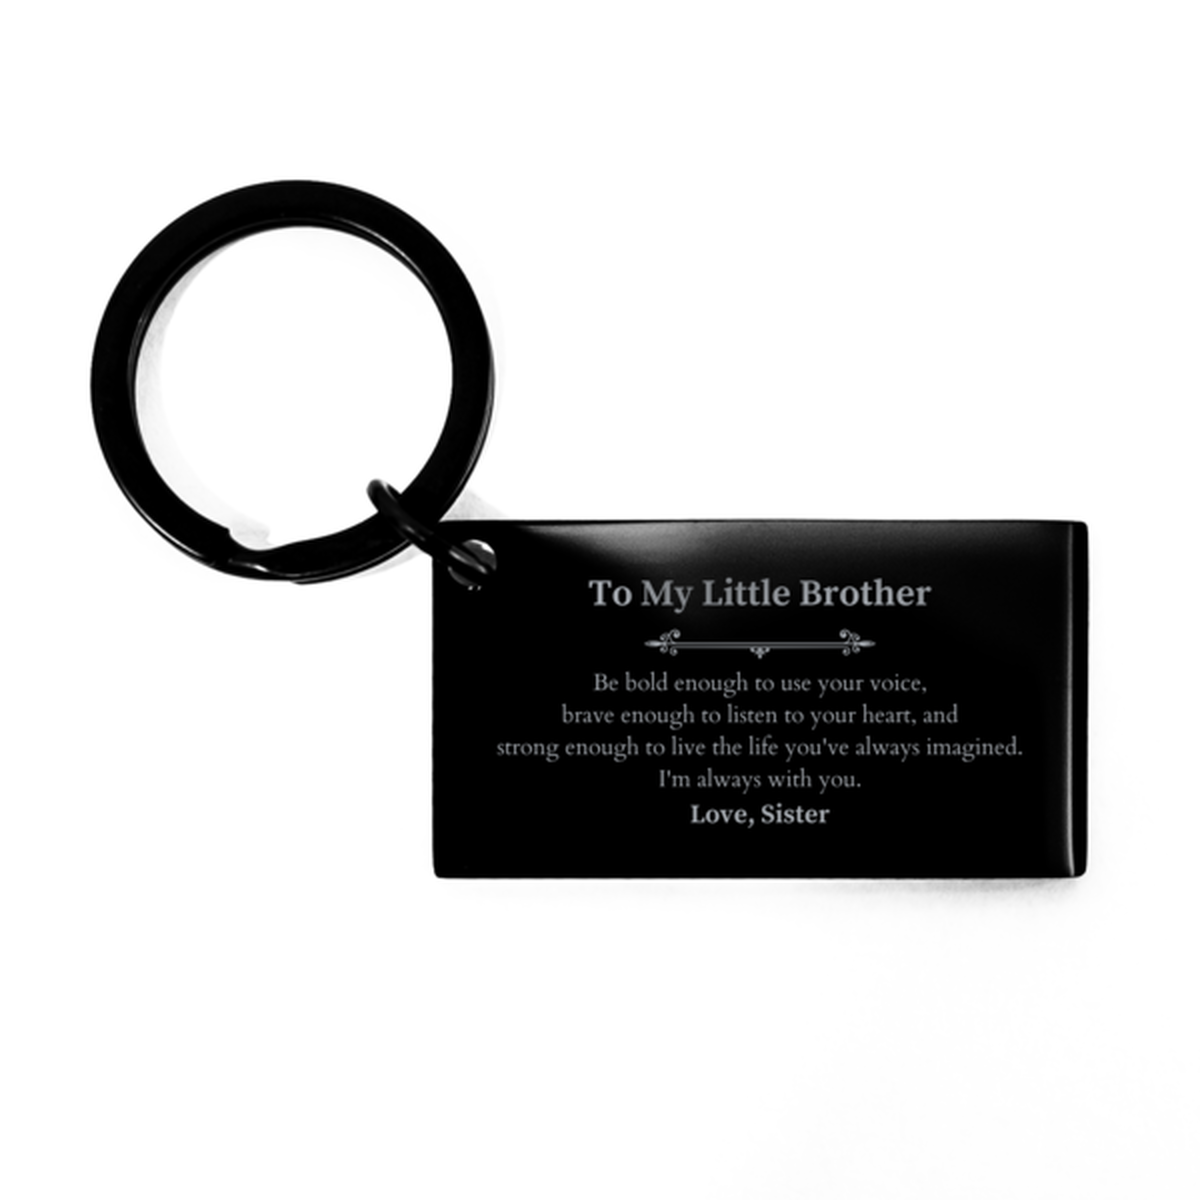 Keepsake Little Brother Keychain Gift Idea Graduation Christmas Birthday Little Brother from Sister, Little Brother Be bold enough to use your voice, brave enough to listen to your heart. Love, Sister